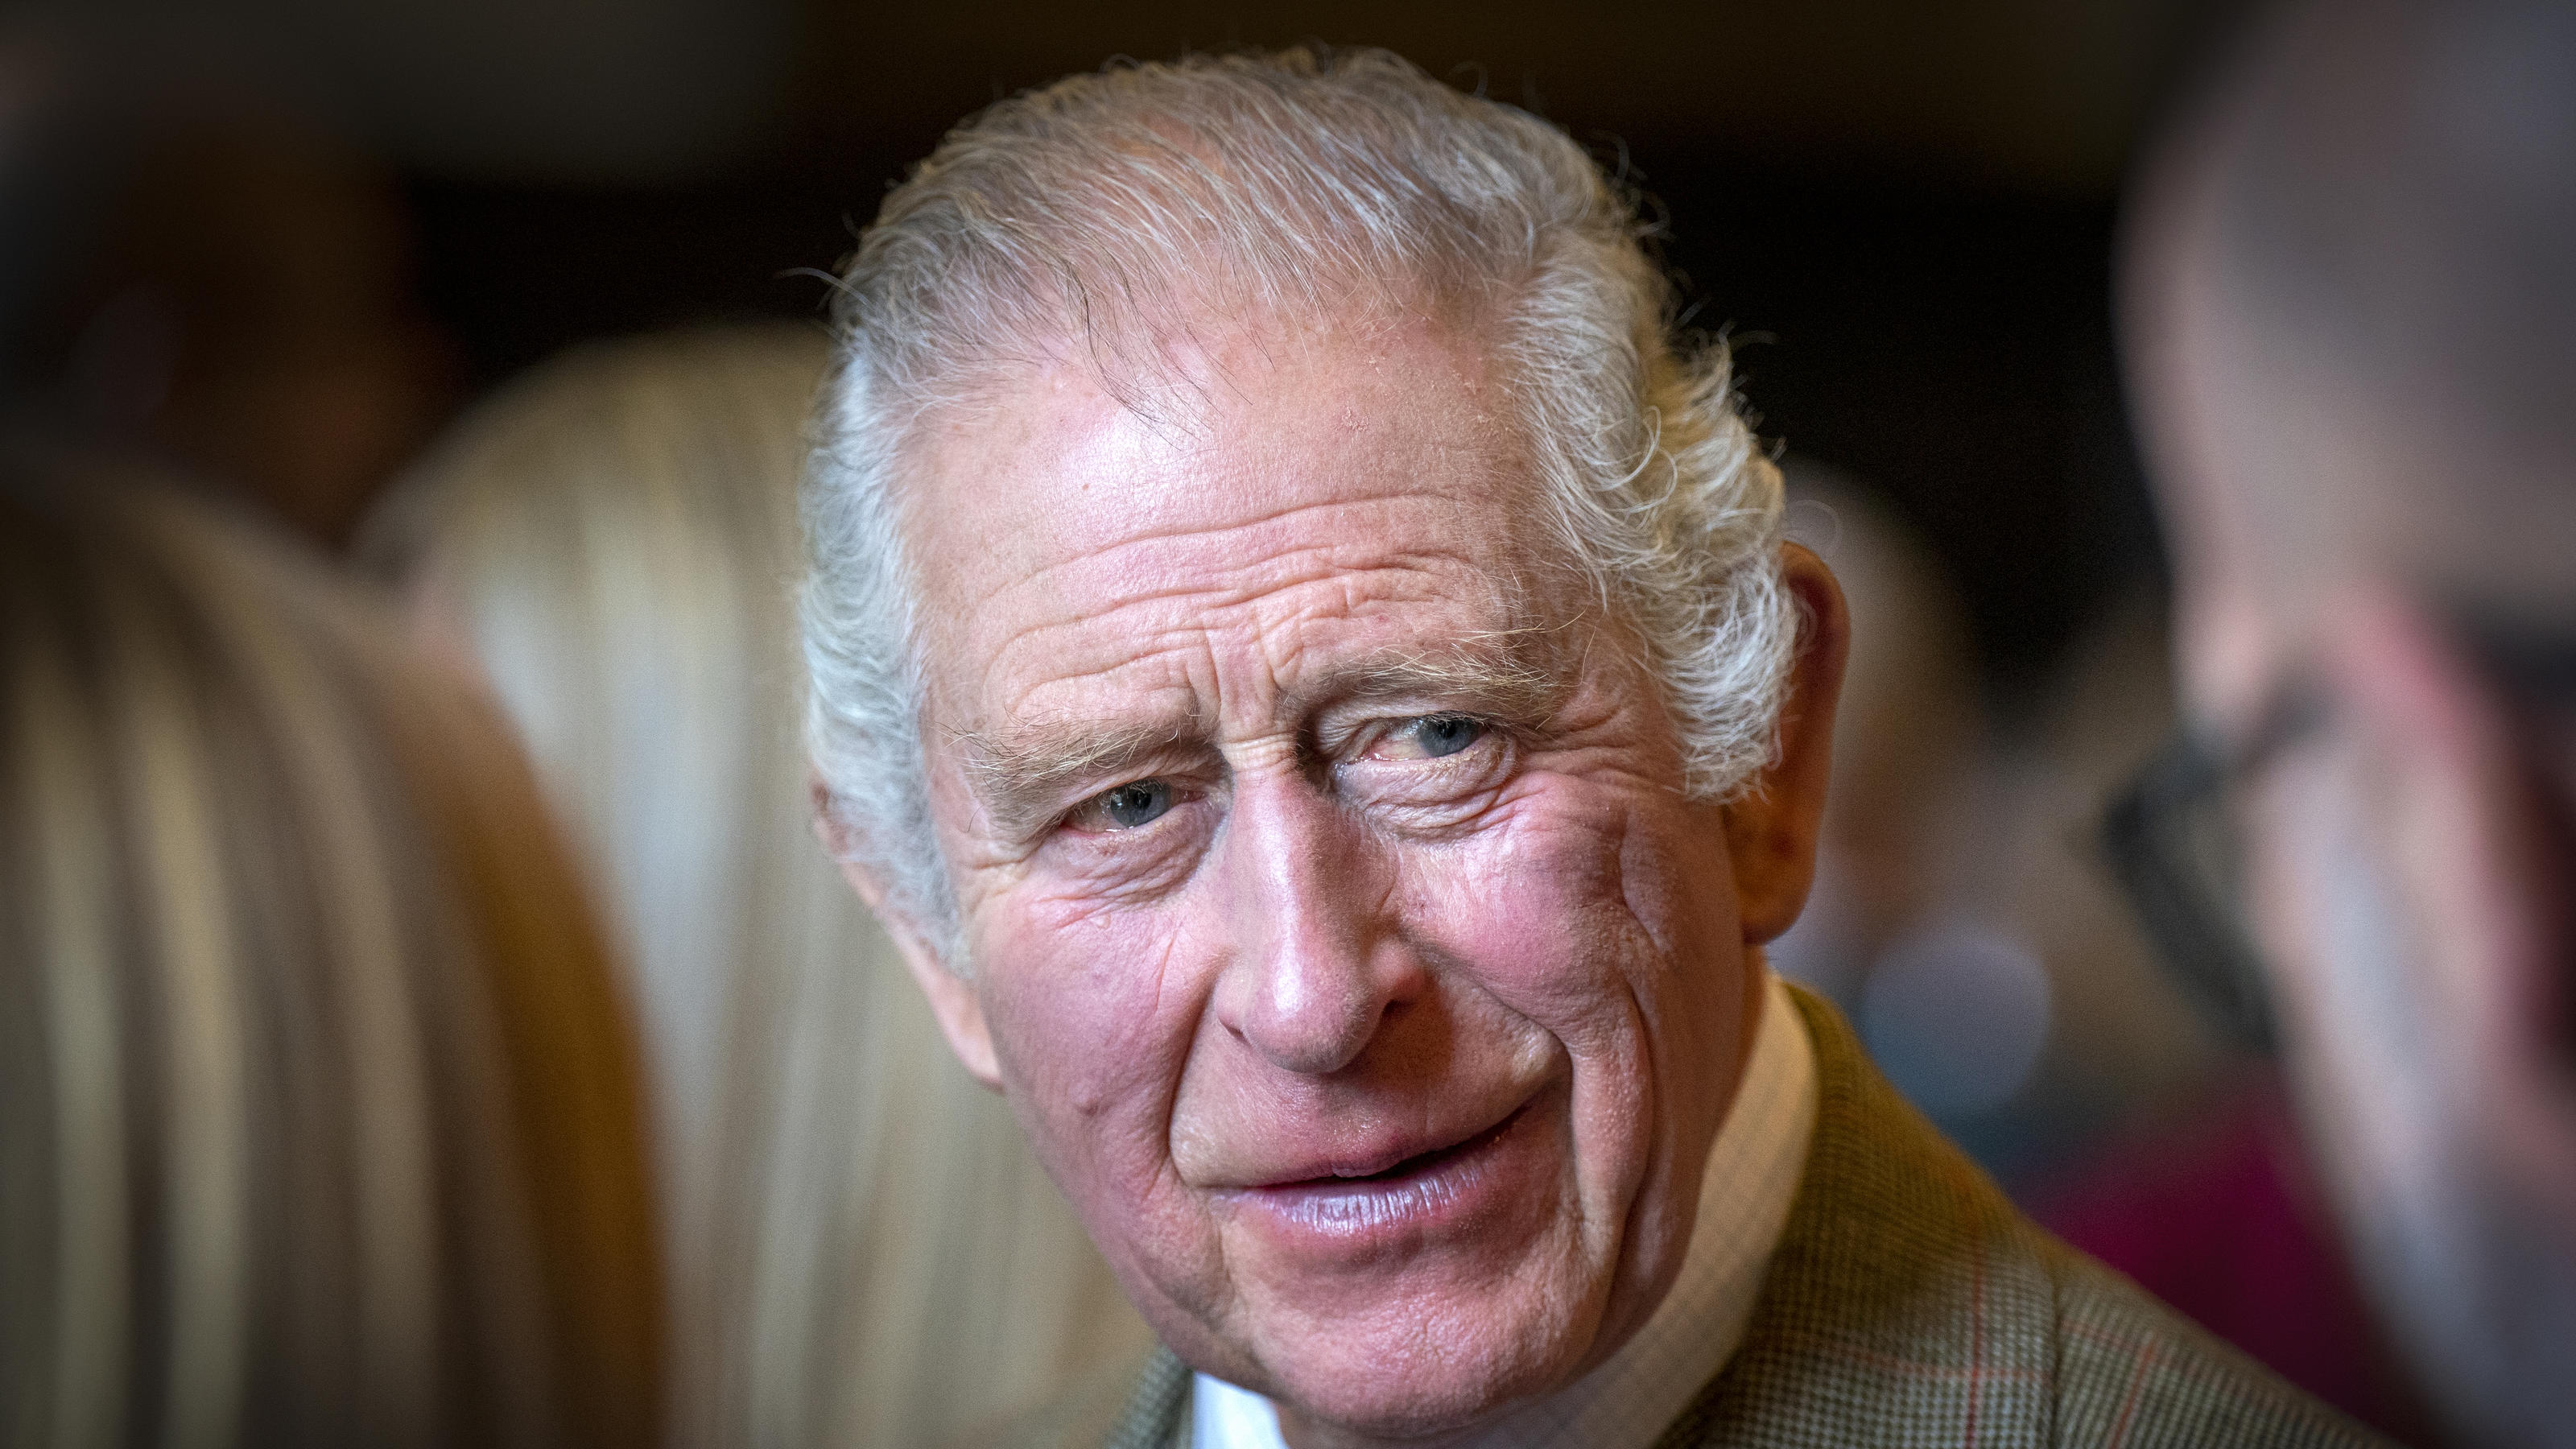 King Charles III during a visit to Aberdeen Town House to meet families who have settled in Aberdeen from Afghanistan, Syria and Ukraine. Photo by Jane Barlow / Royal Rota via royalfoto